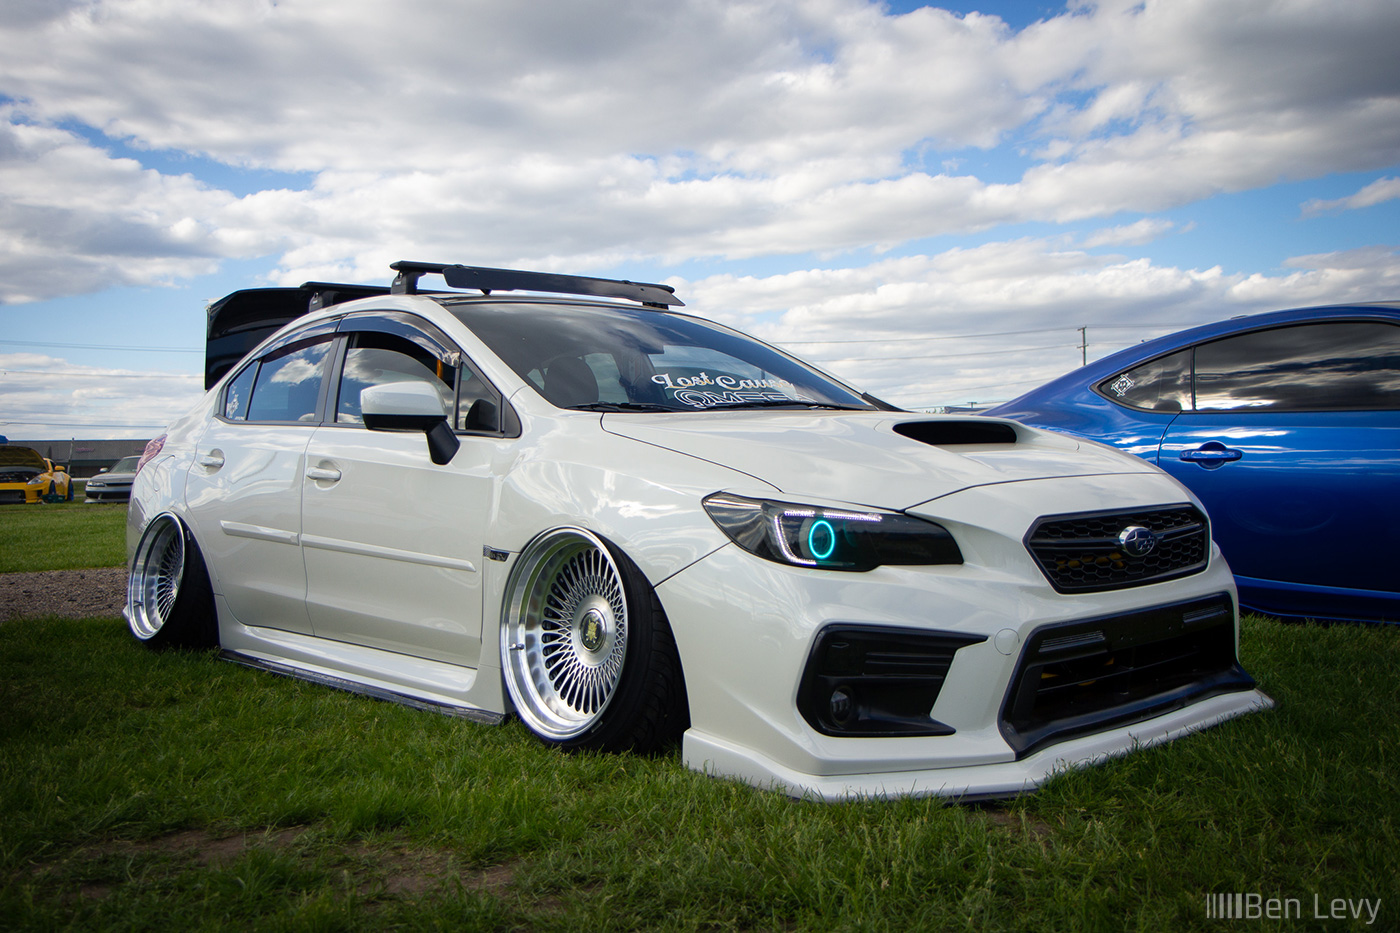 White, Bagged VA WRX at IFO in Rockford